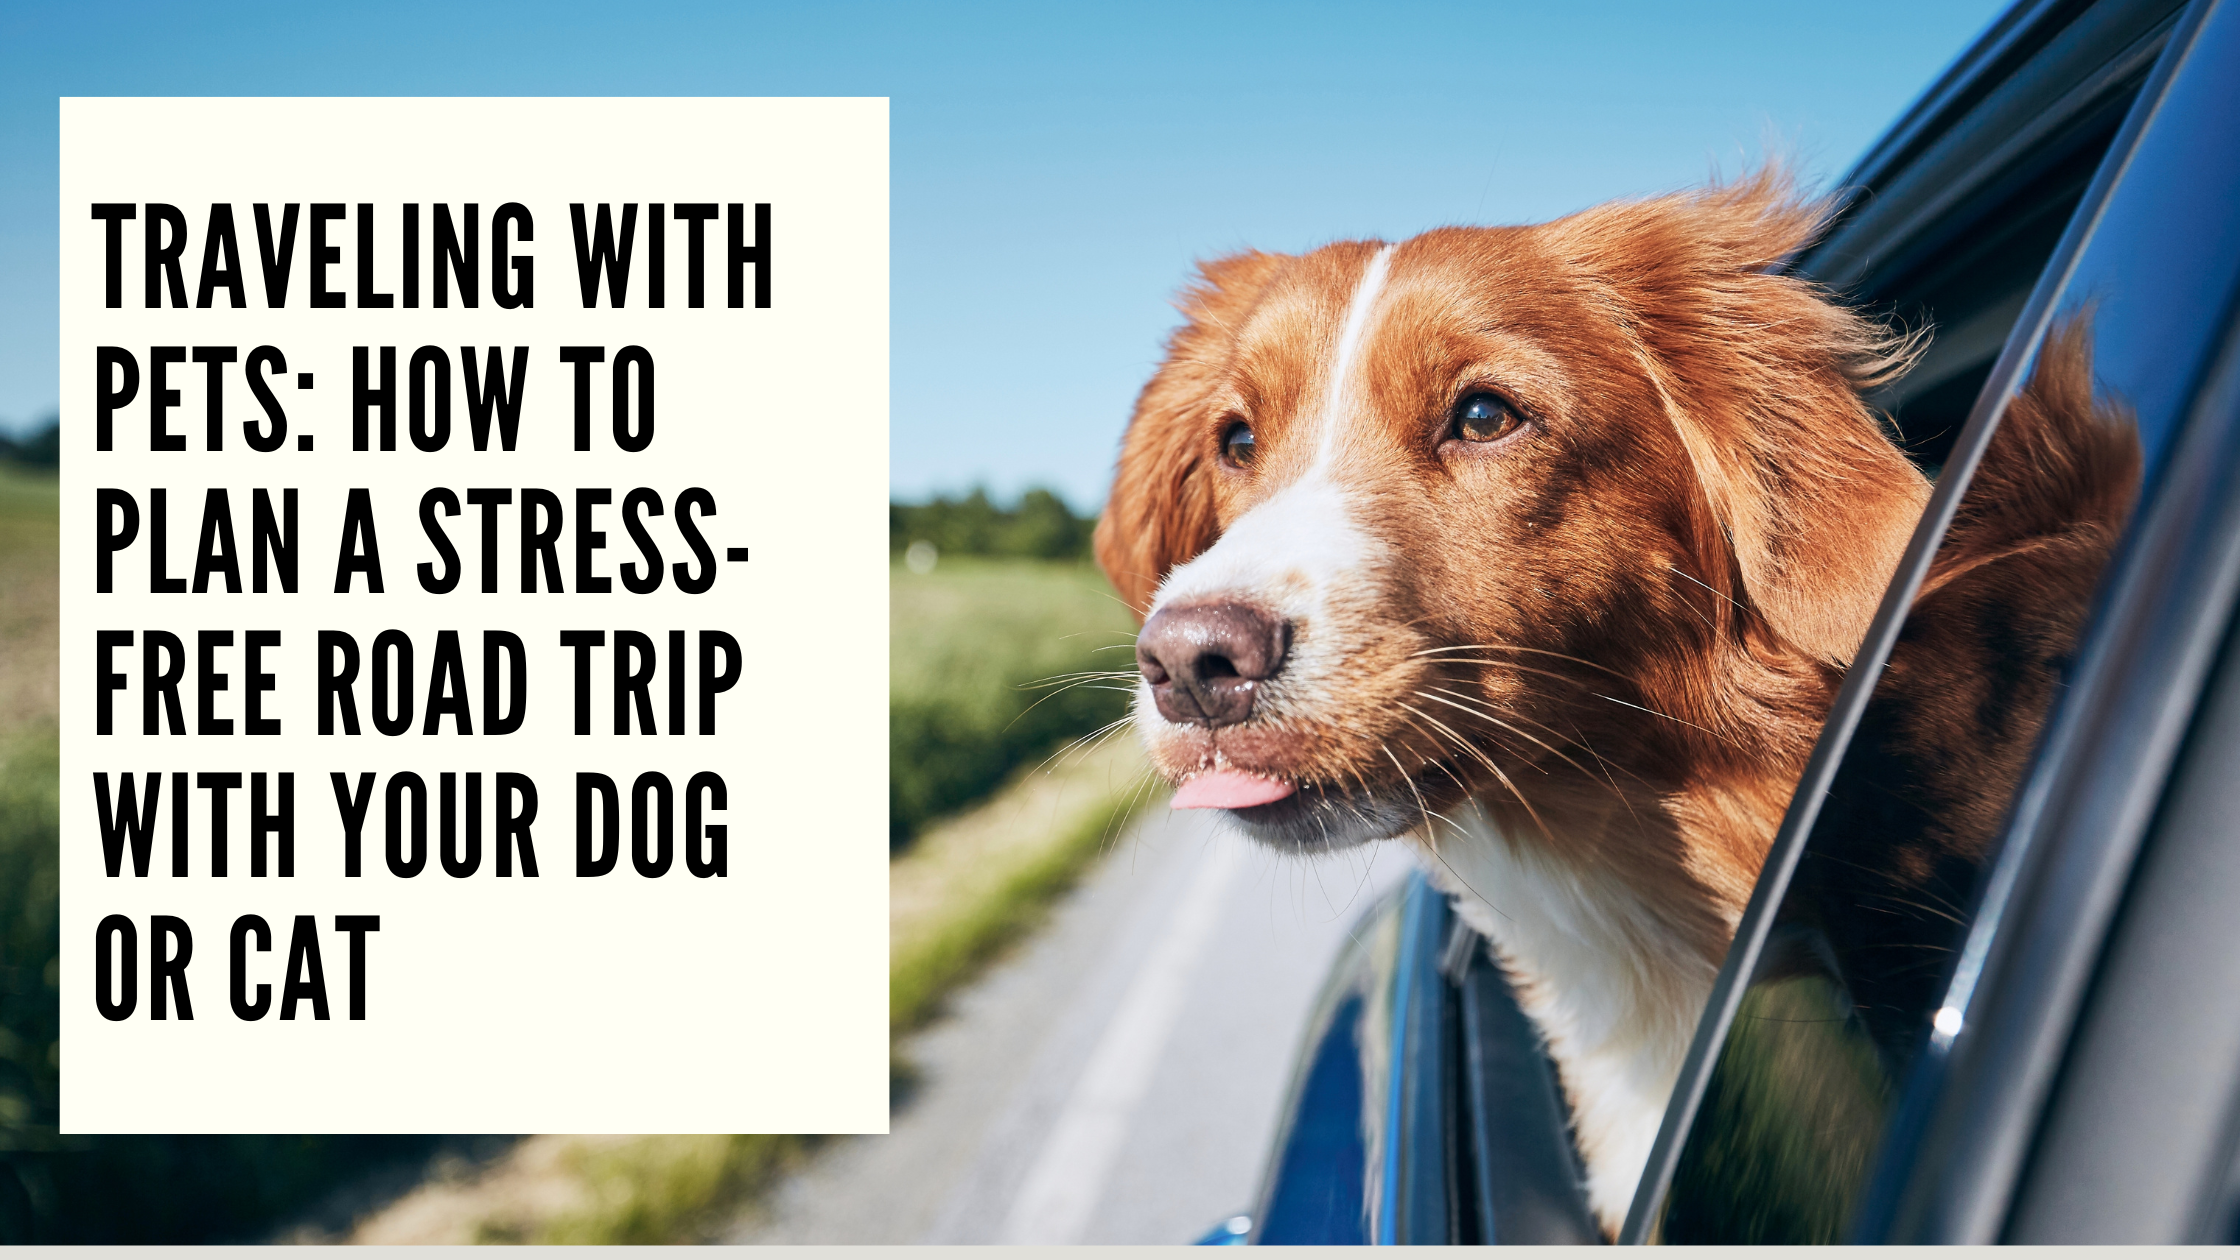 Traveling with Pets How to Plan a Stress-Free Road Trip with Your Dog or Cat